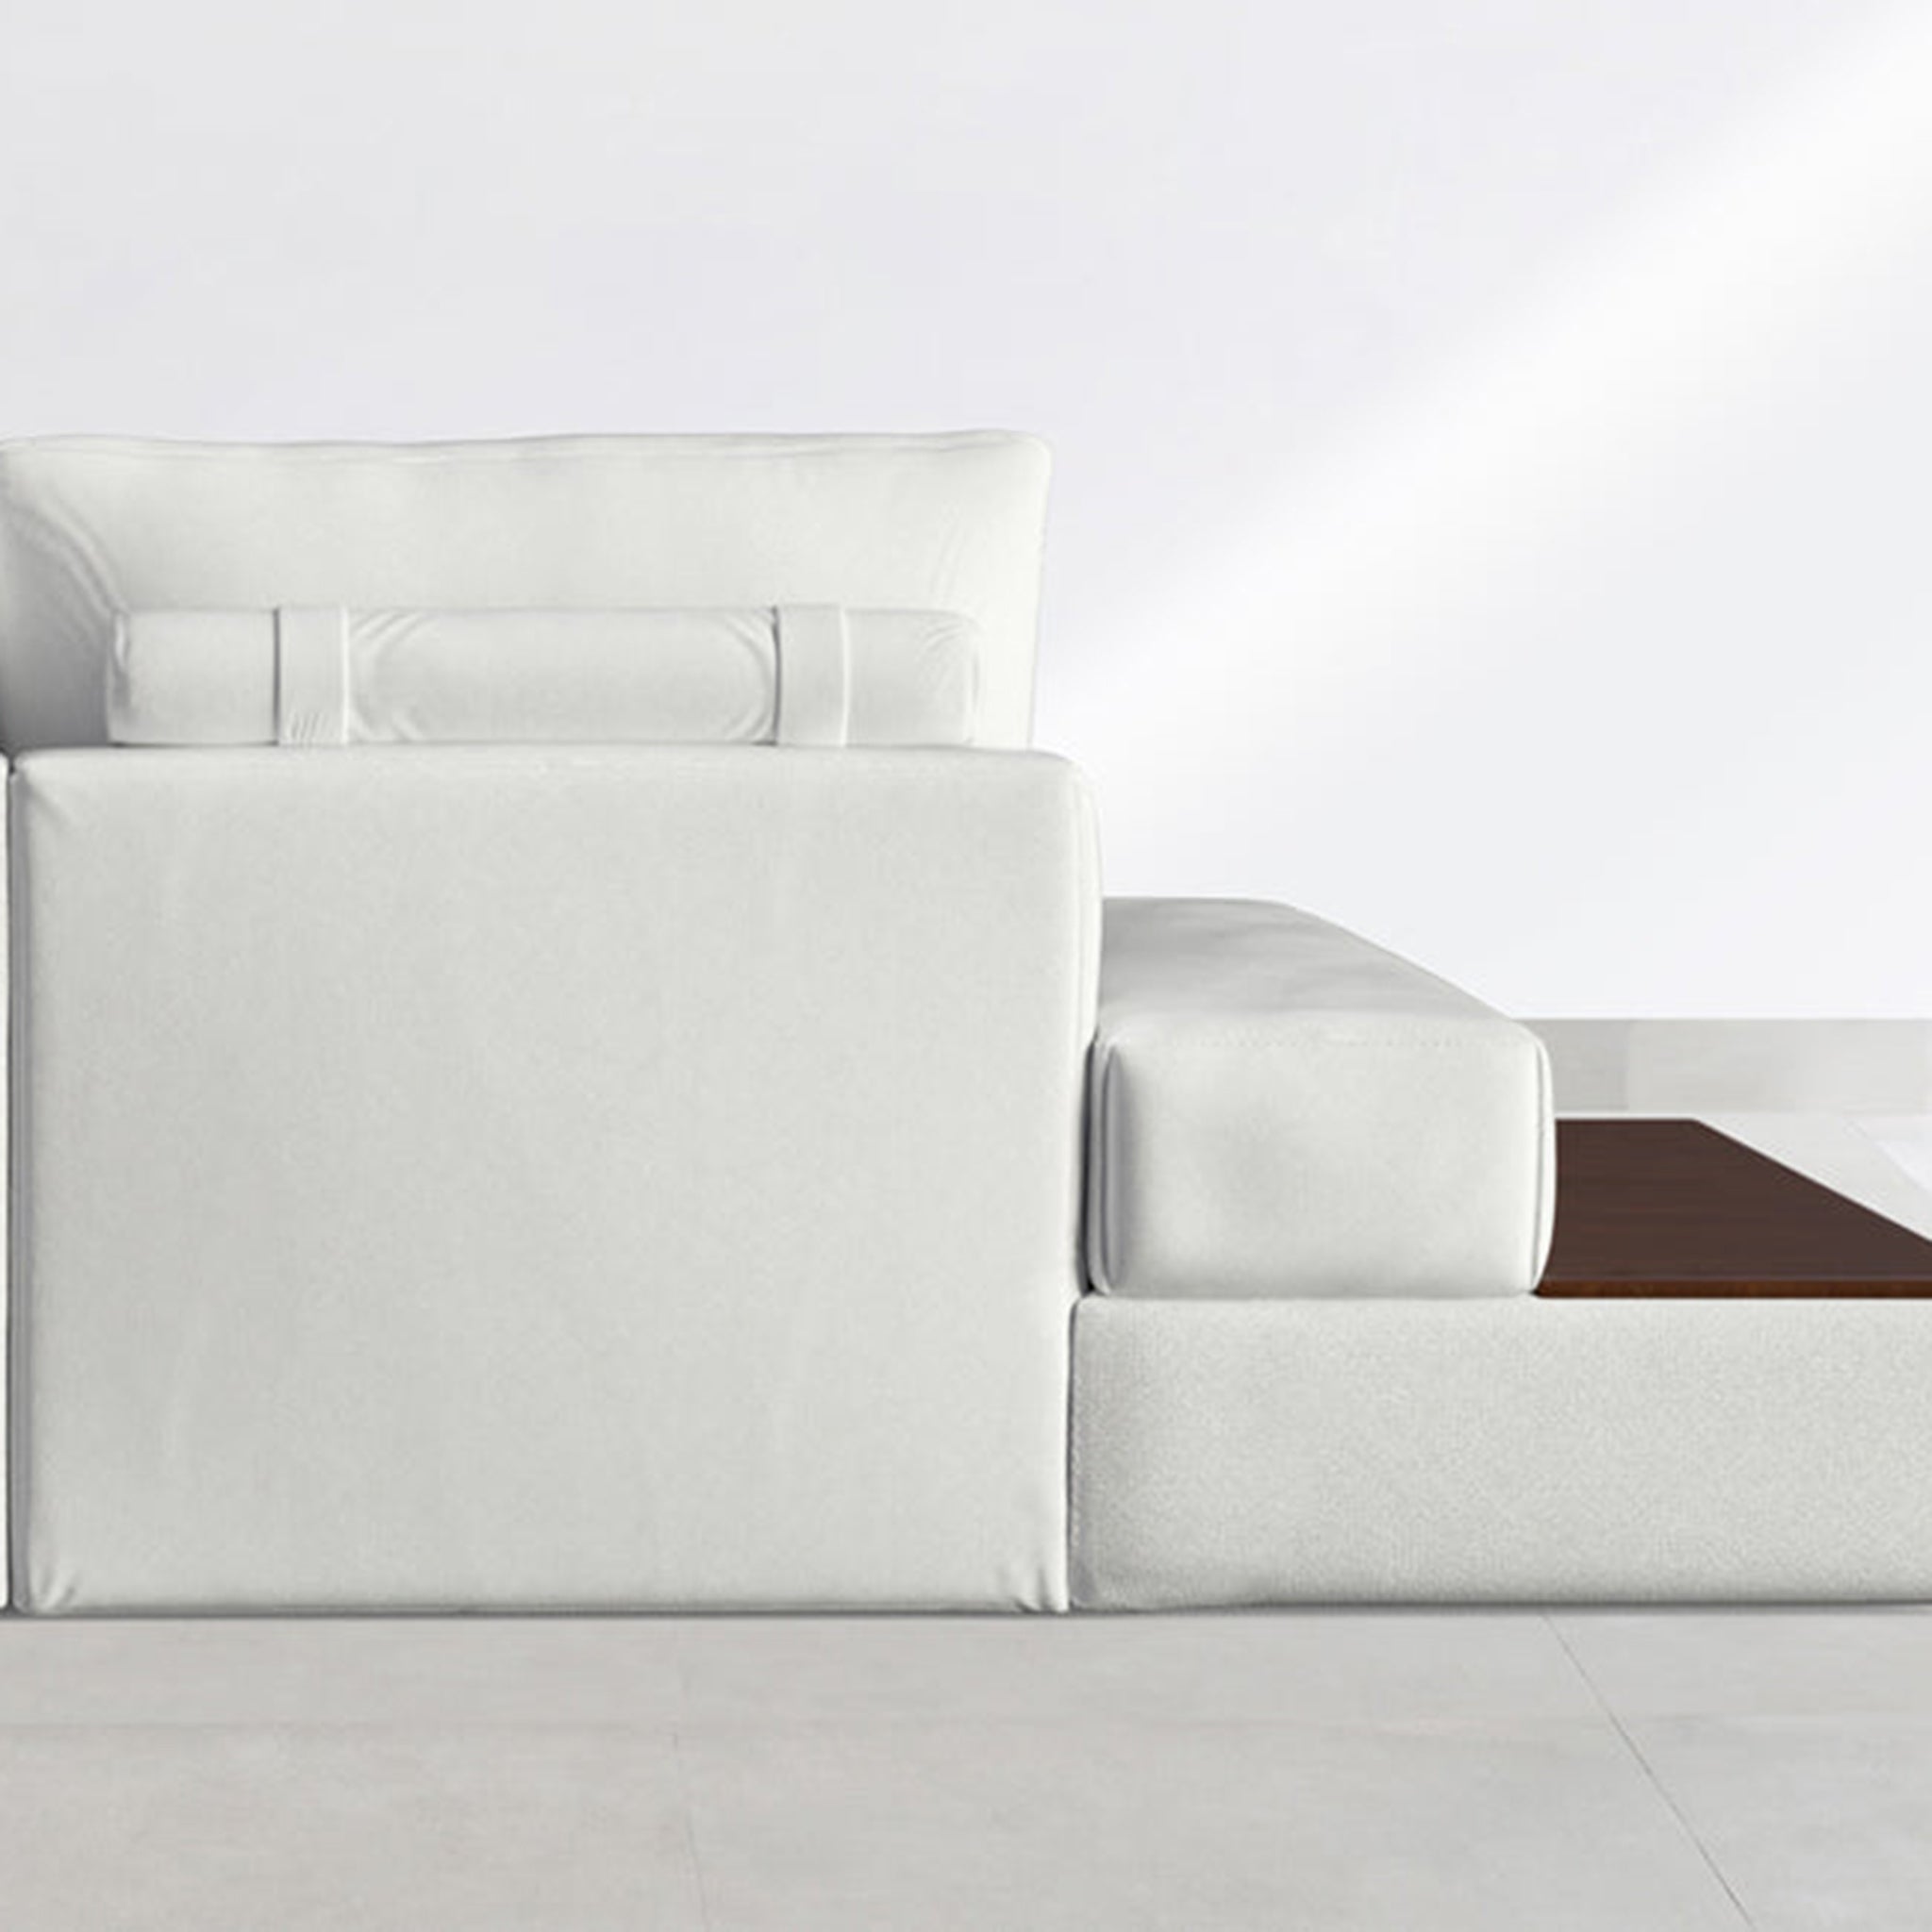 Close-up view of a modern white sofa with a built-in wooden side table, highlighting the sleek design and comfortable seating.